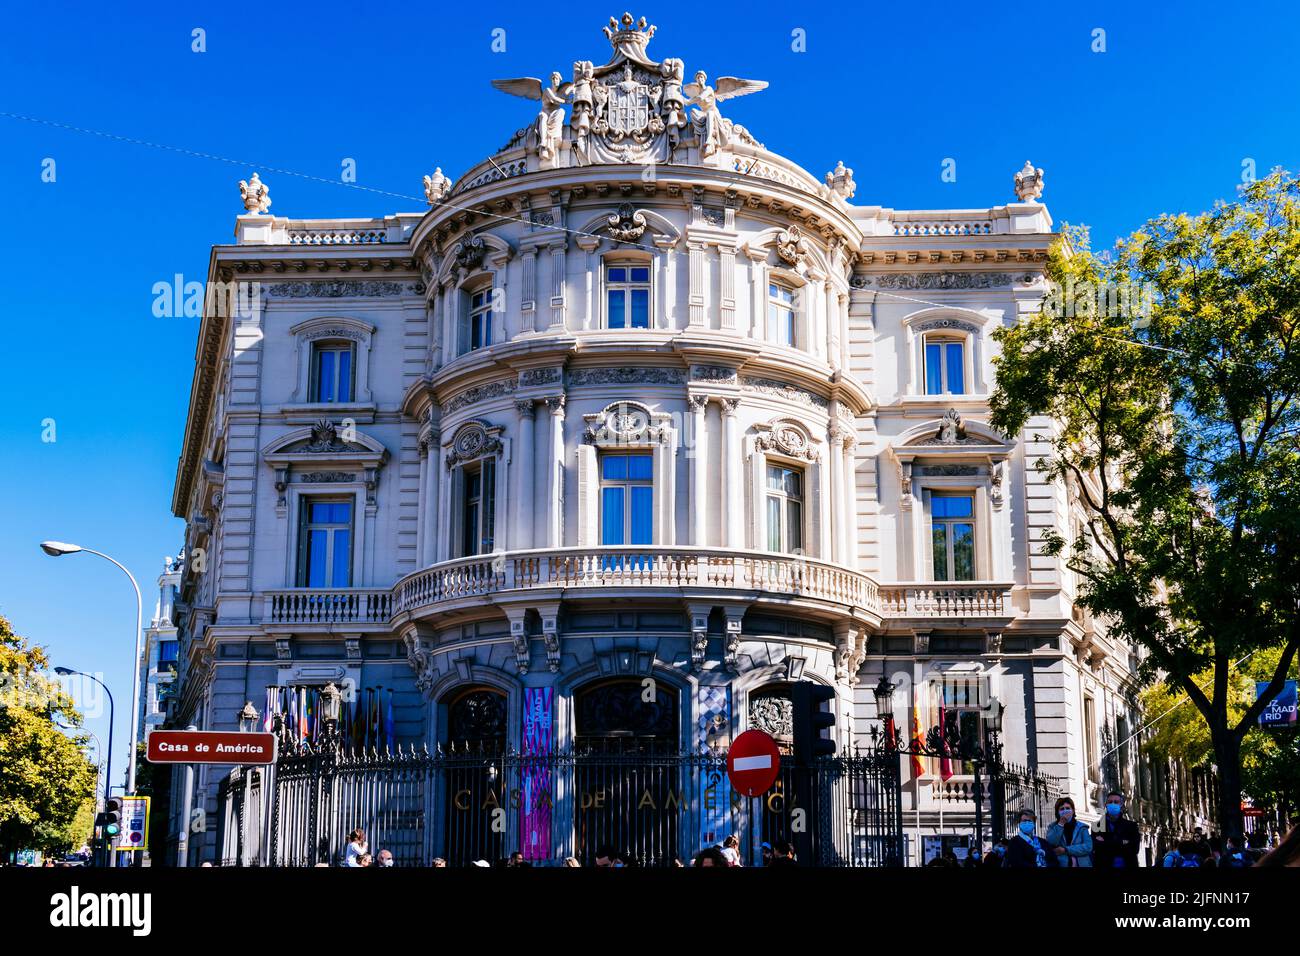 The Palace of Linares, Palacio de Linares, is a palace located in Madrid. It was declared national historic-artistic monument. Located at the plaza de Stock Photo